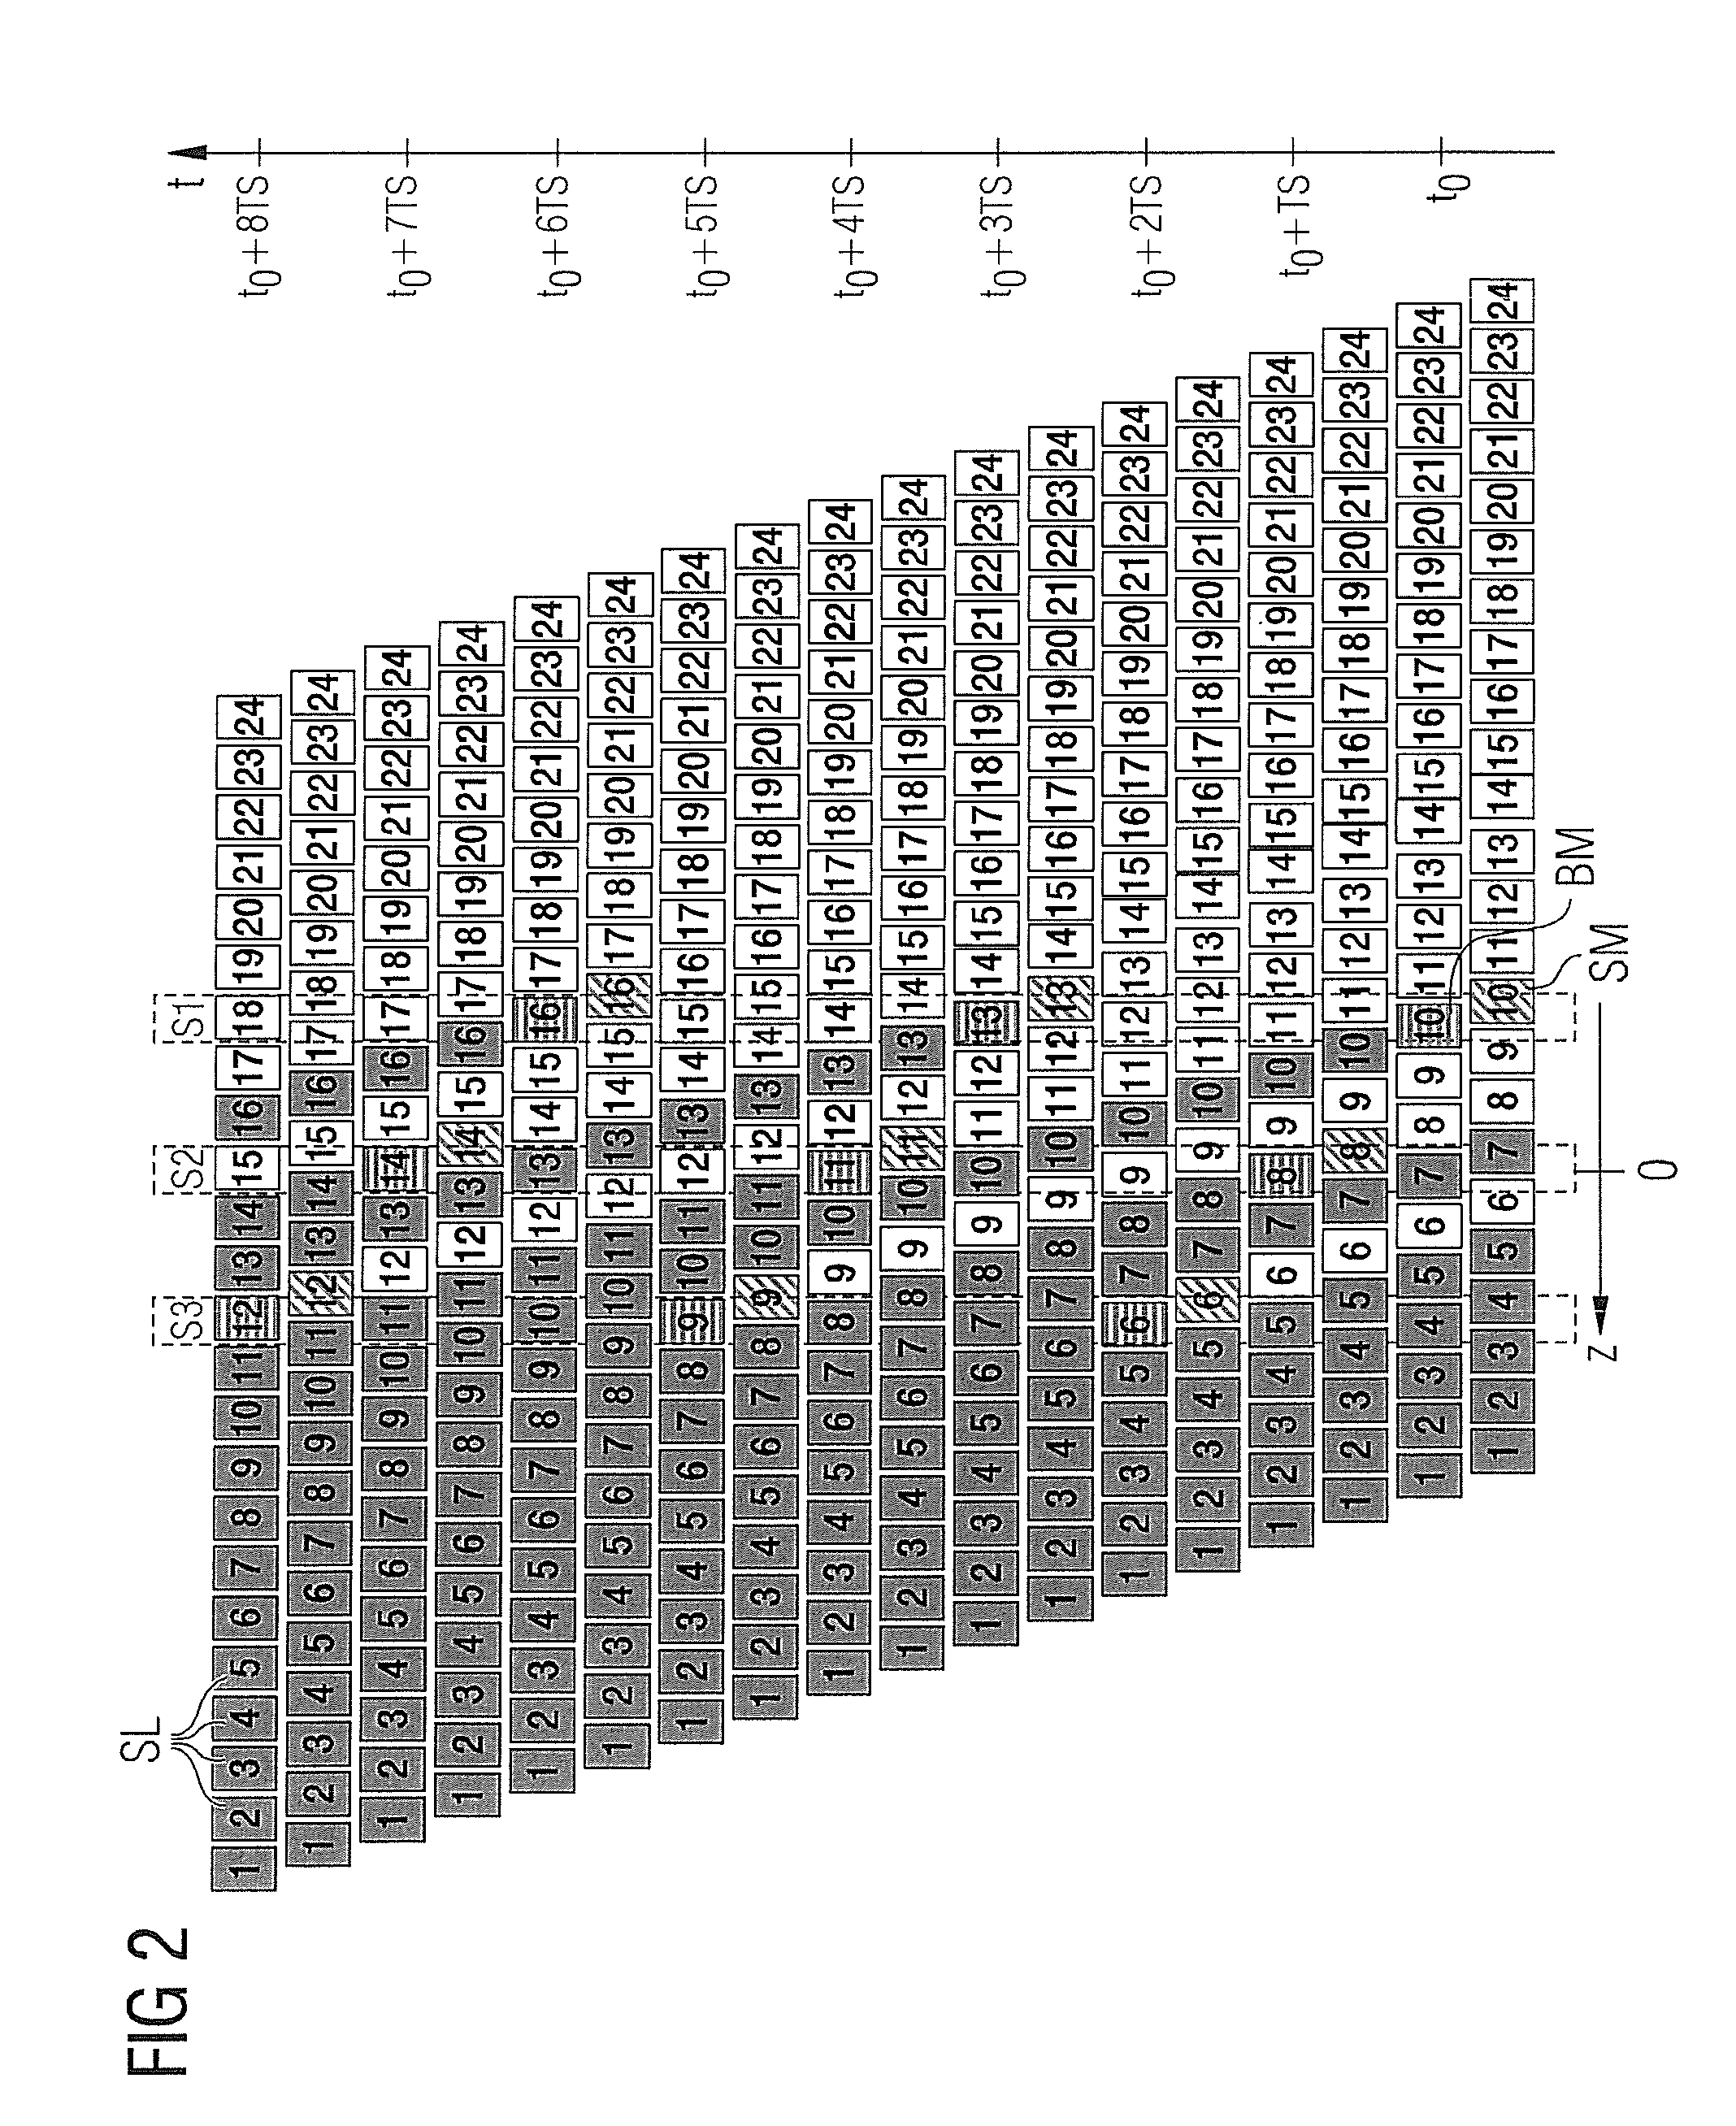 Method and magnetic resonance tomography system to generate magnetic resonance image data of an examination subject